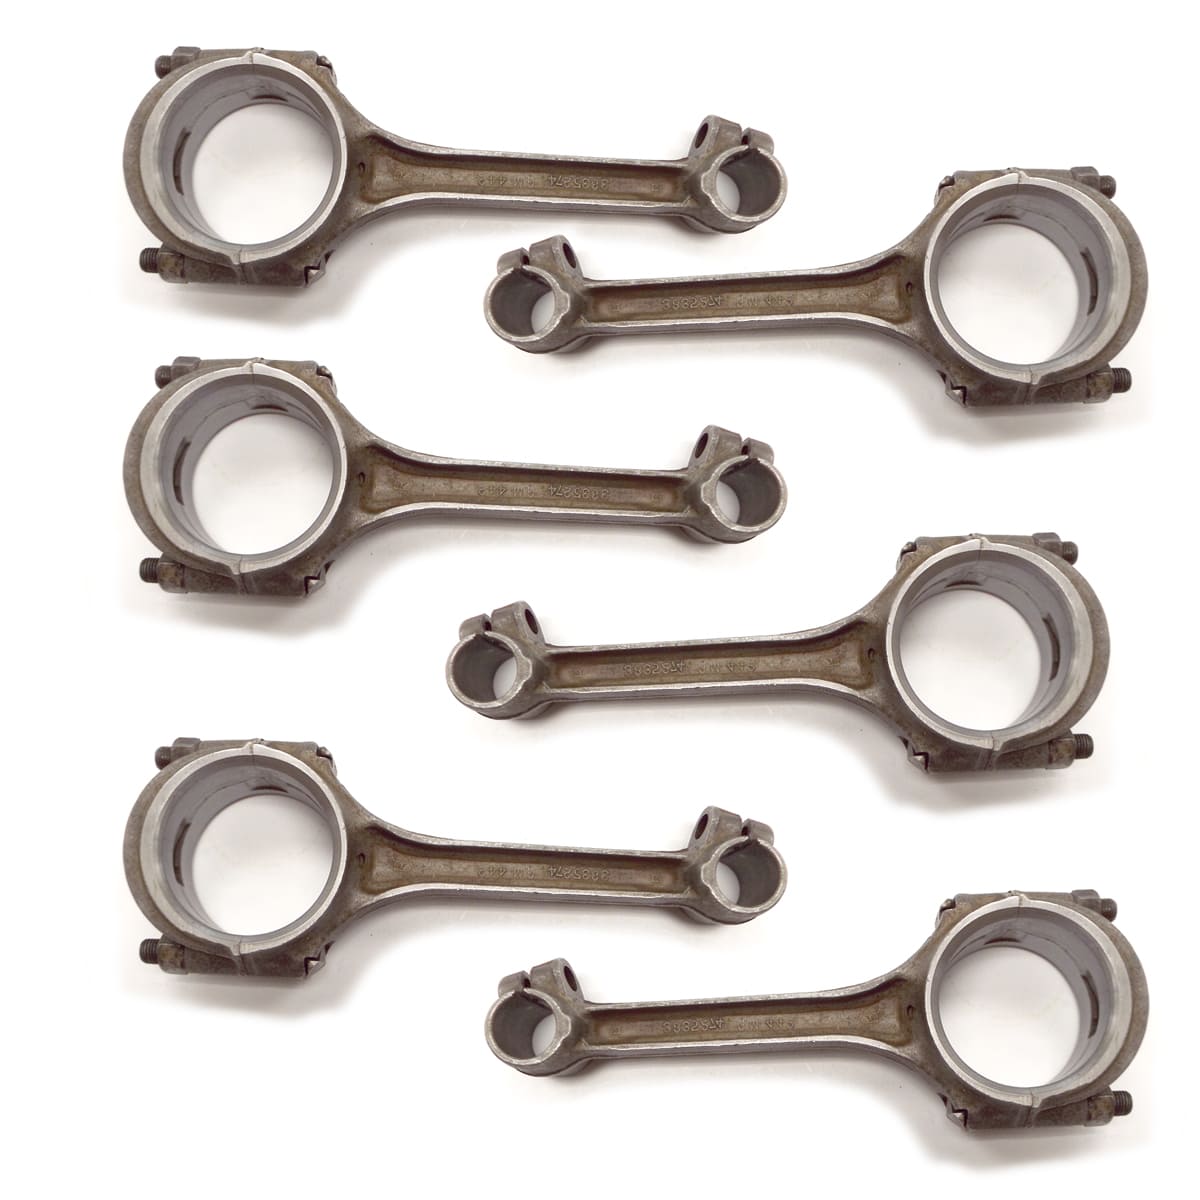 1948-1953 Connecting Rod/Babbit 216/235 Standard plus Core ME308 Chevrolet and GMC Pickup Truck MUST HAVE YOUR CORE